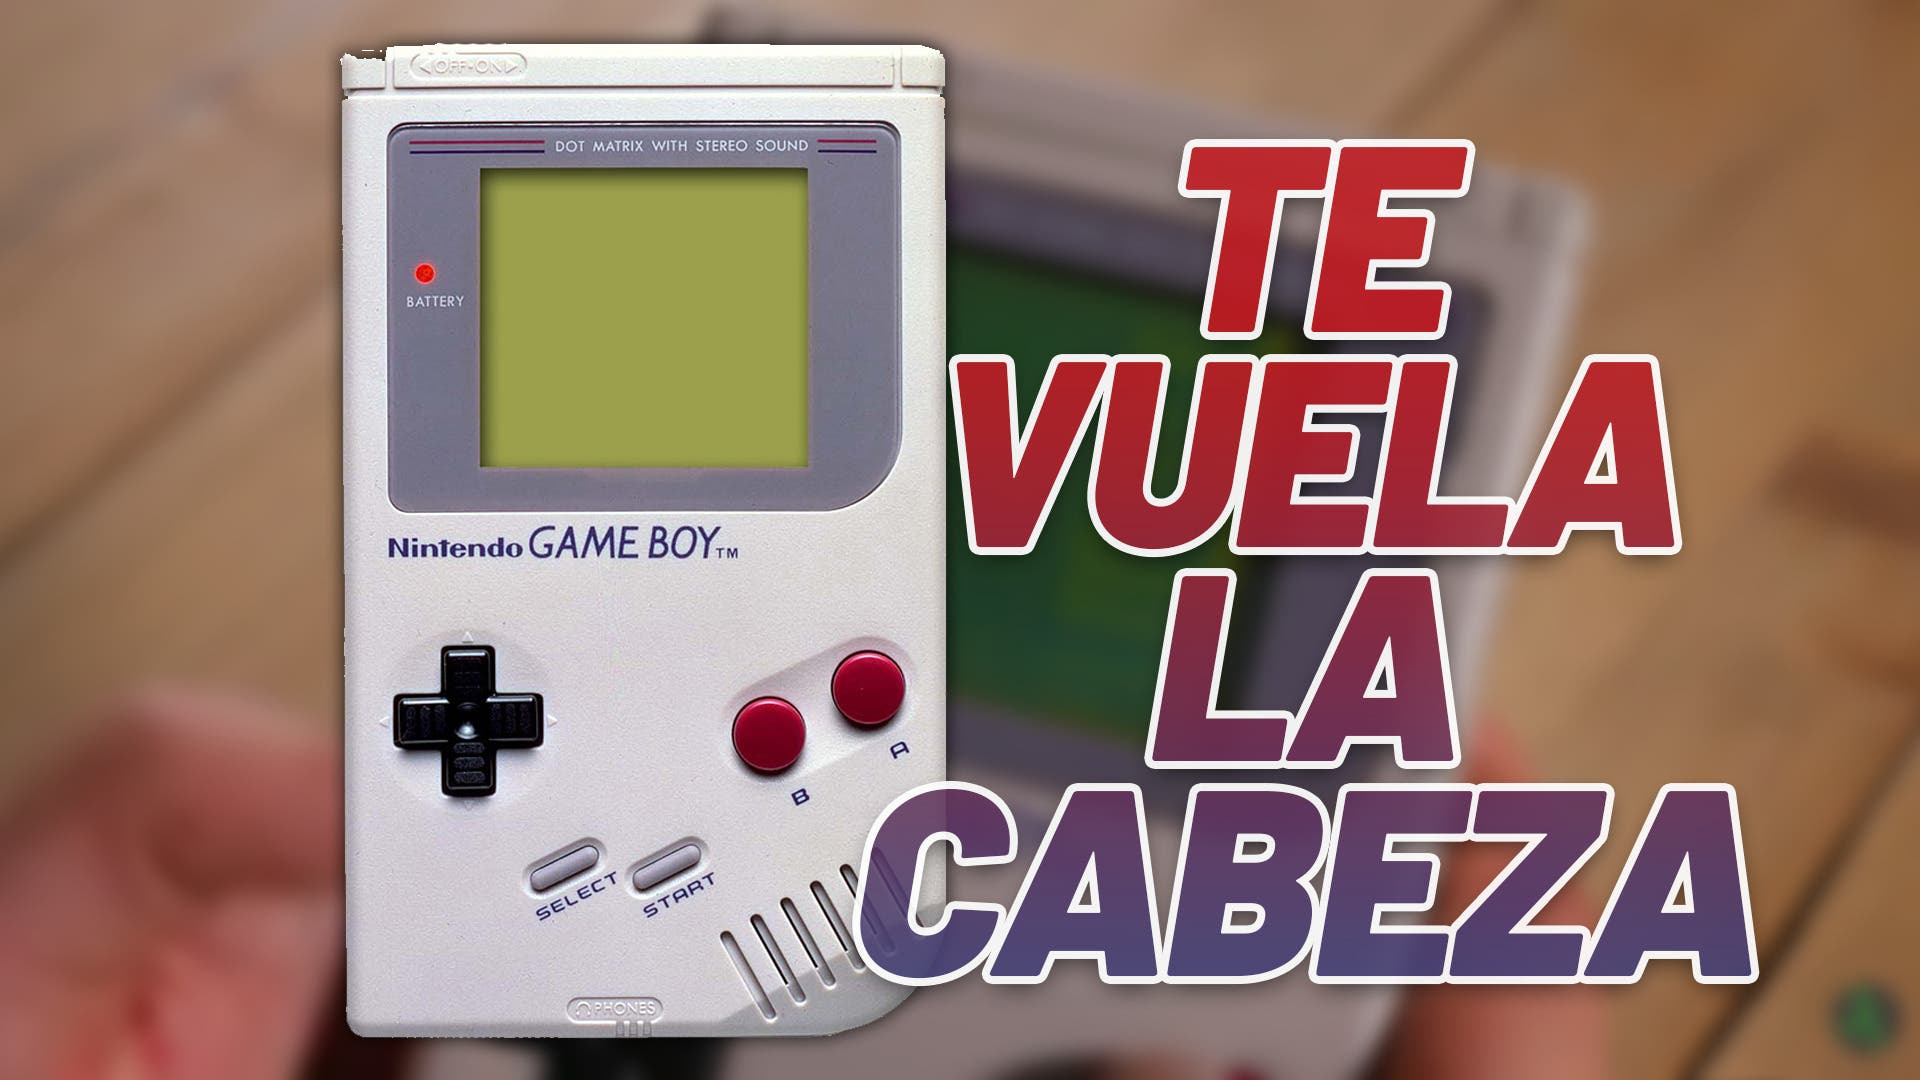 If you played the Game Boy as a child, this ultra-realistic animation will blow your mind